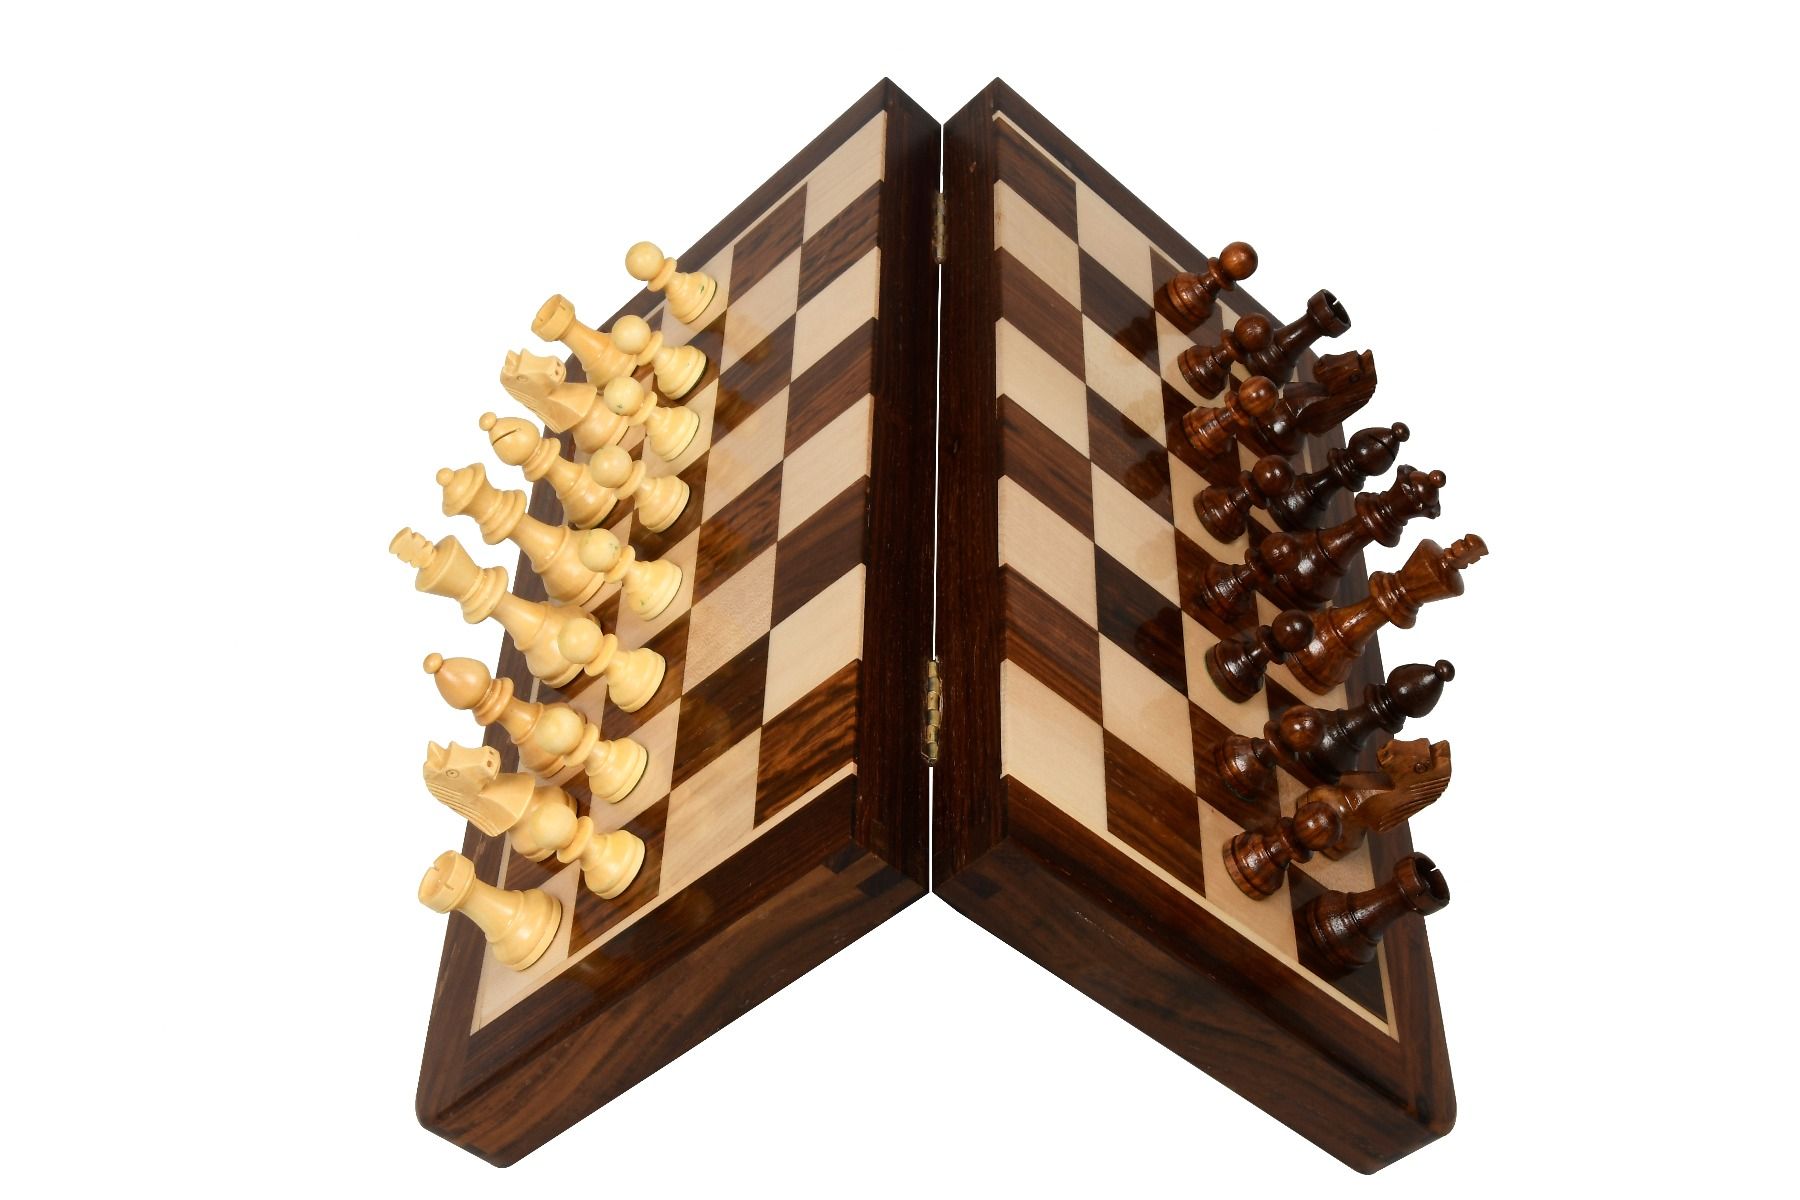 17cm Square with Travel Bag 7" Deluxe Folding Wooden Magnetic Travel Chess 